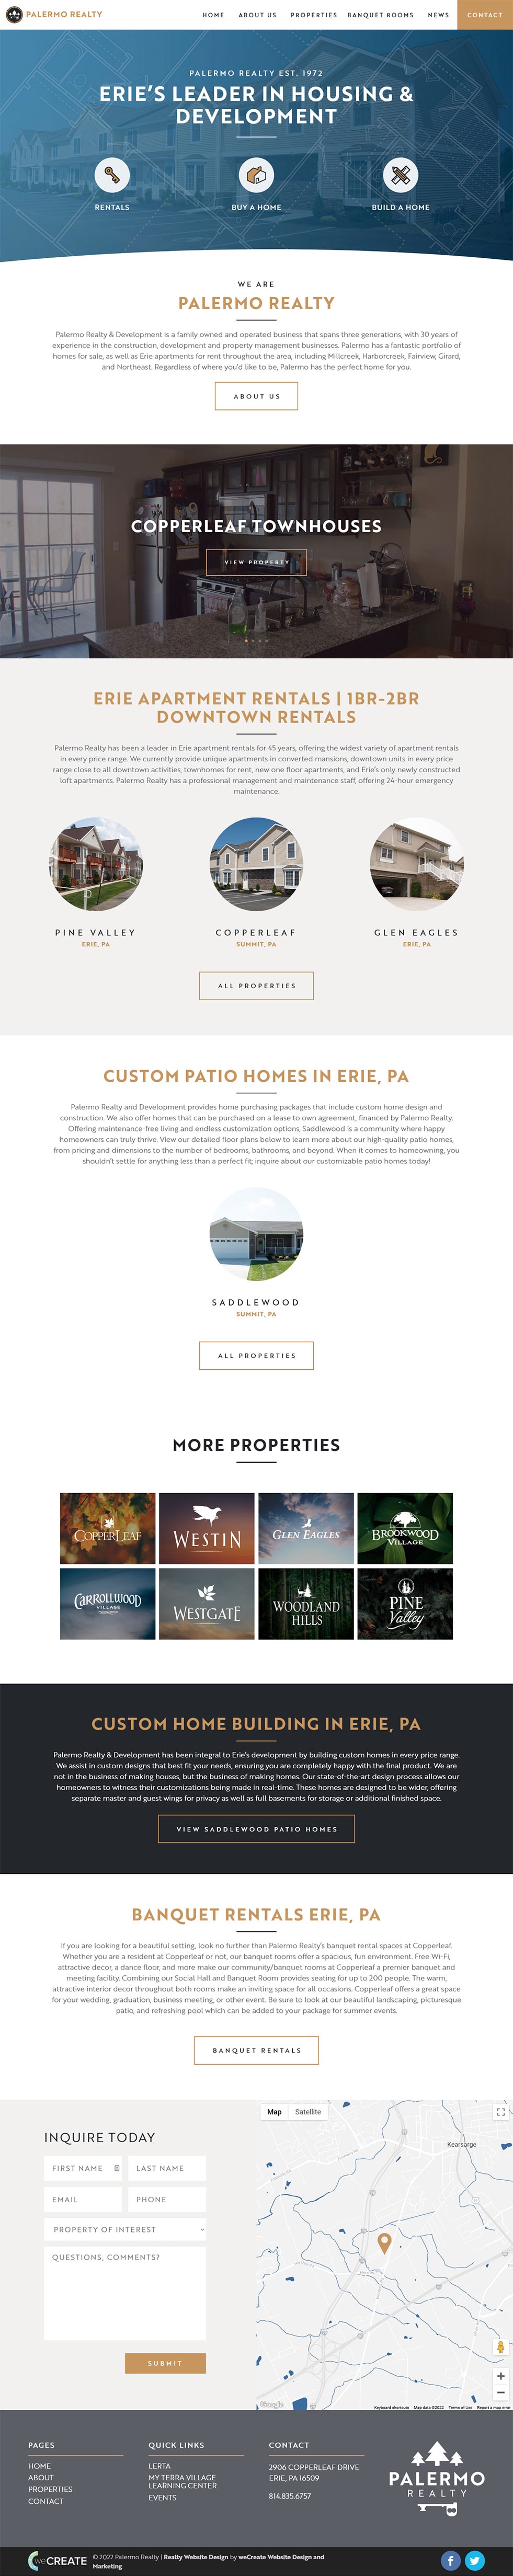 Palermo Realty website preview. Select the visit site button to see this page in your browser